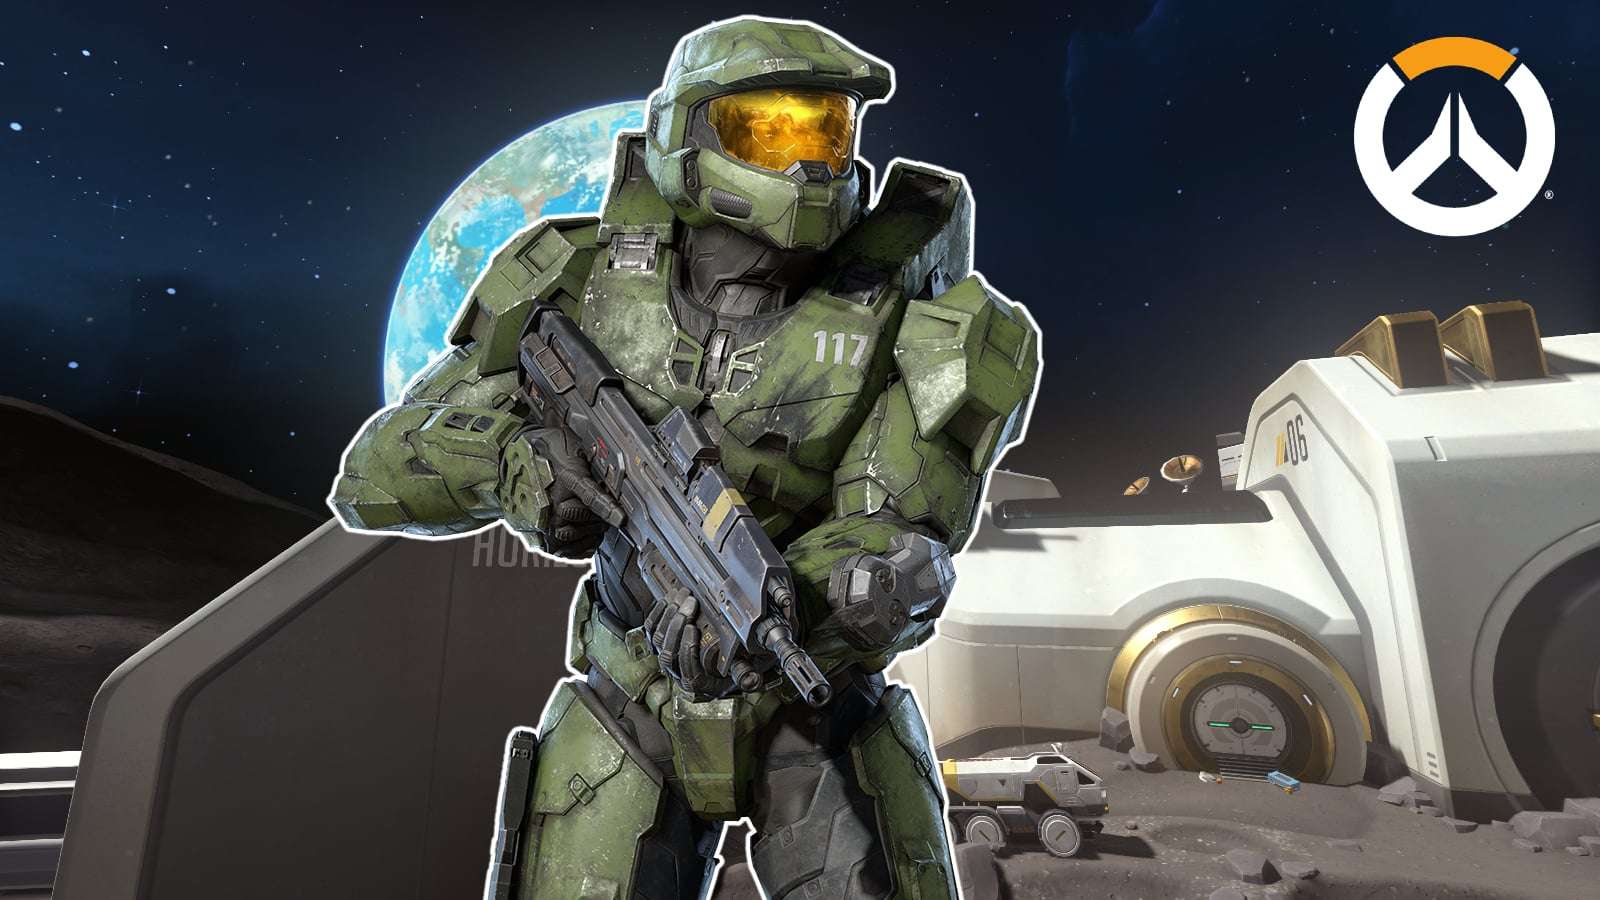 halo master chief stands against Overwatch horizon lunar colony background in space with earth behind him